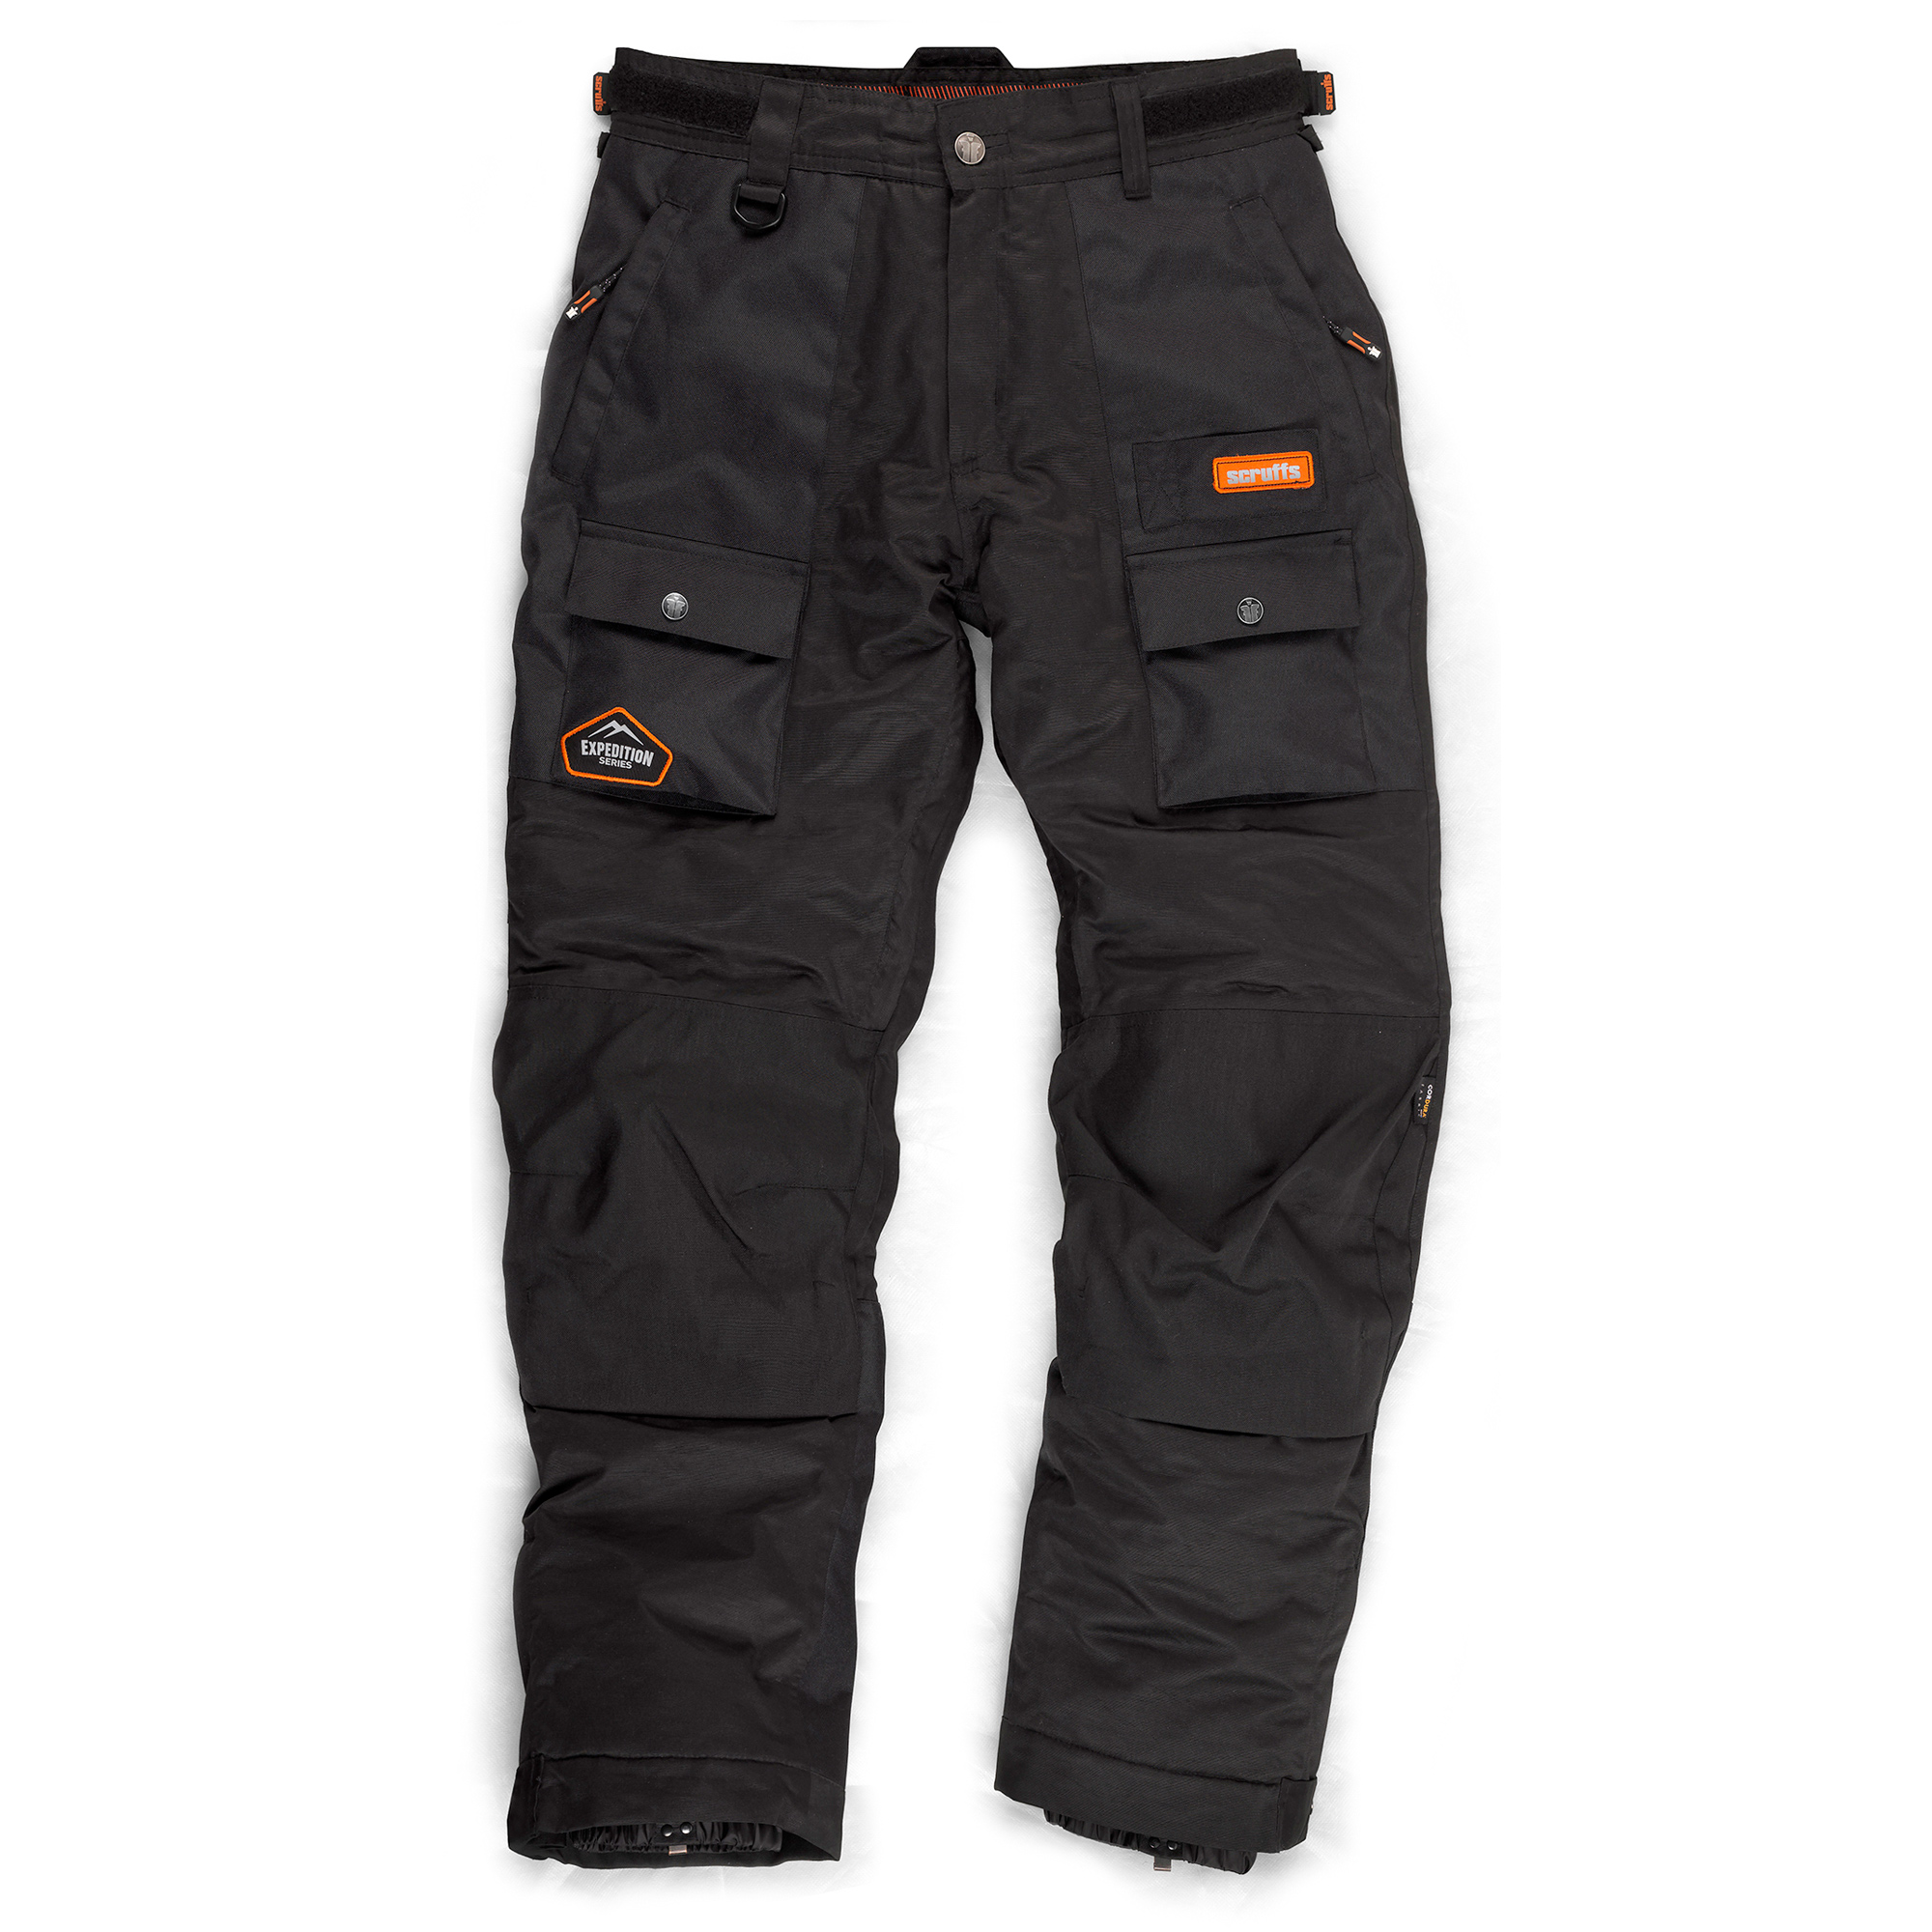 SCRUFFS EXPEDITION THERMO THERMAL LINED MENS WORK TROUSERS BREATHABLE ...